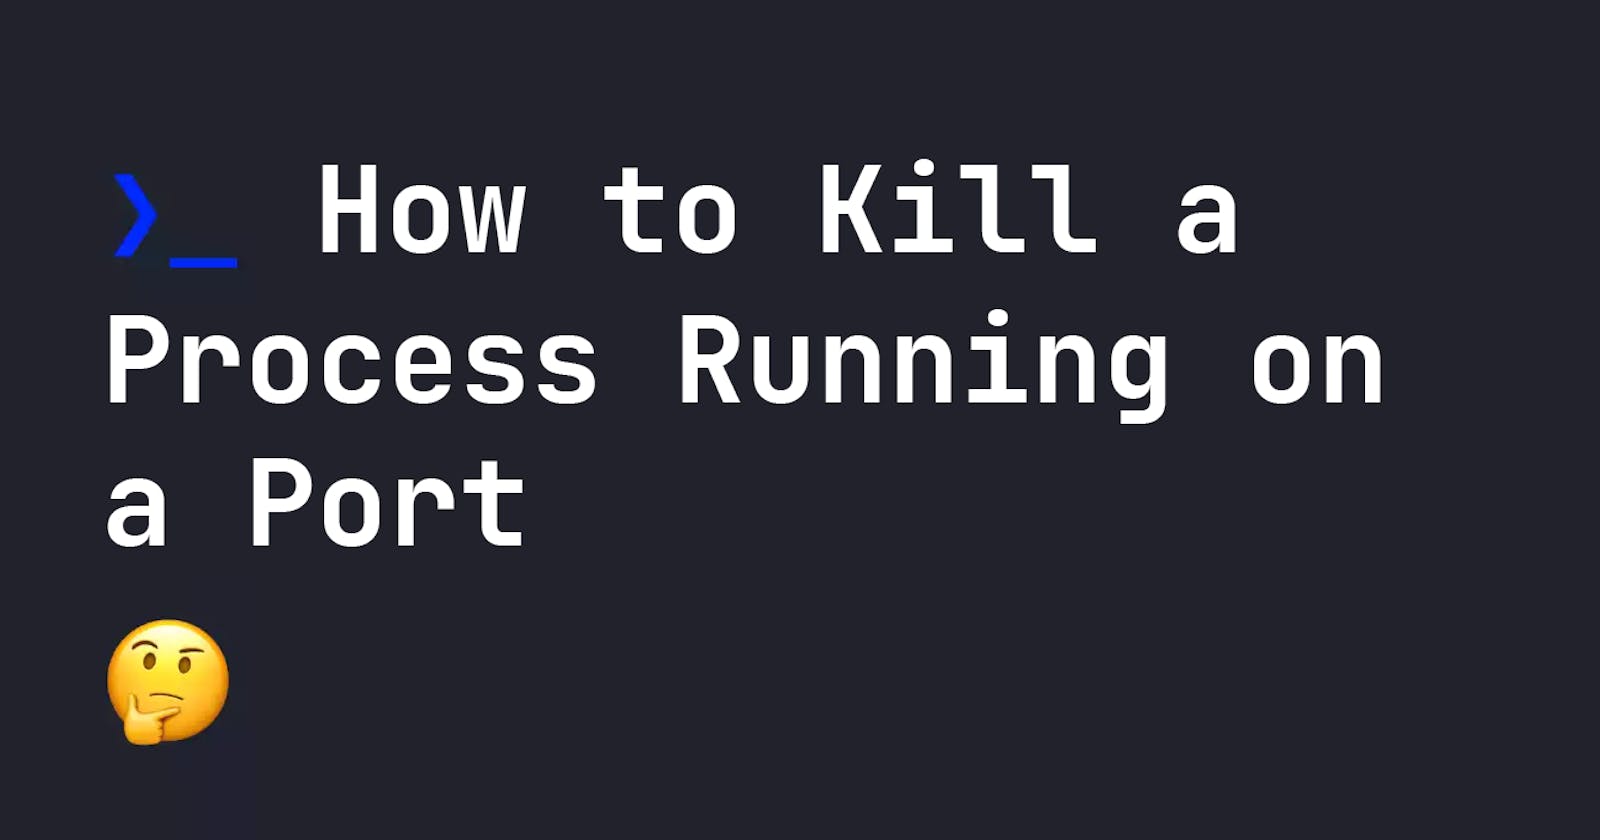 How to Kill a Process Running on a Port